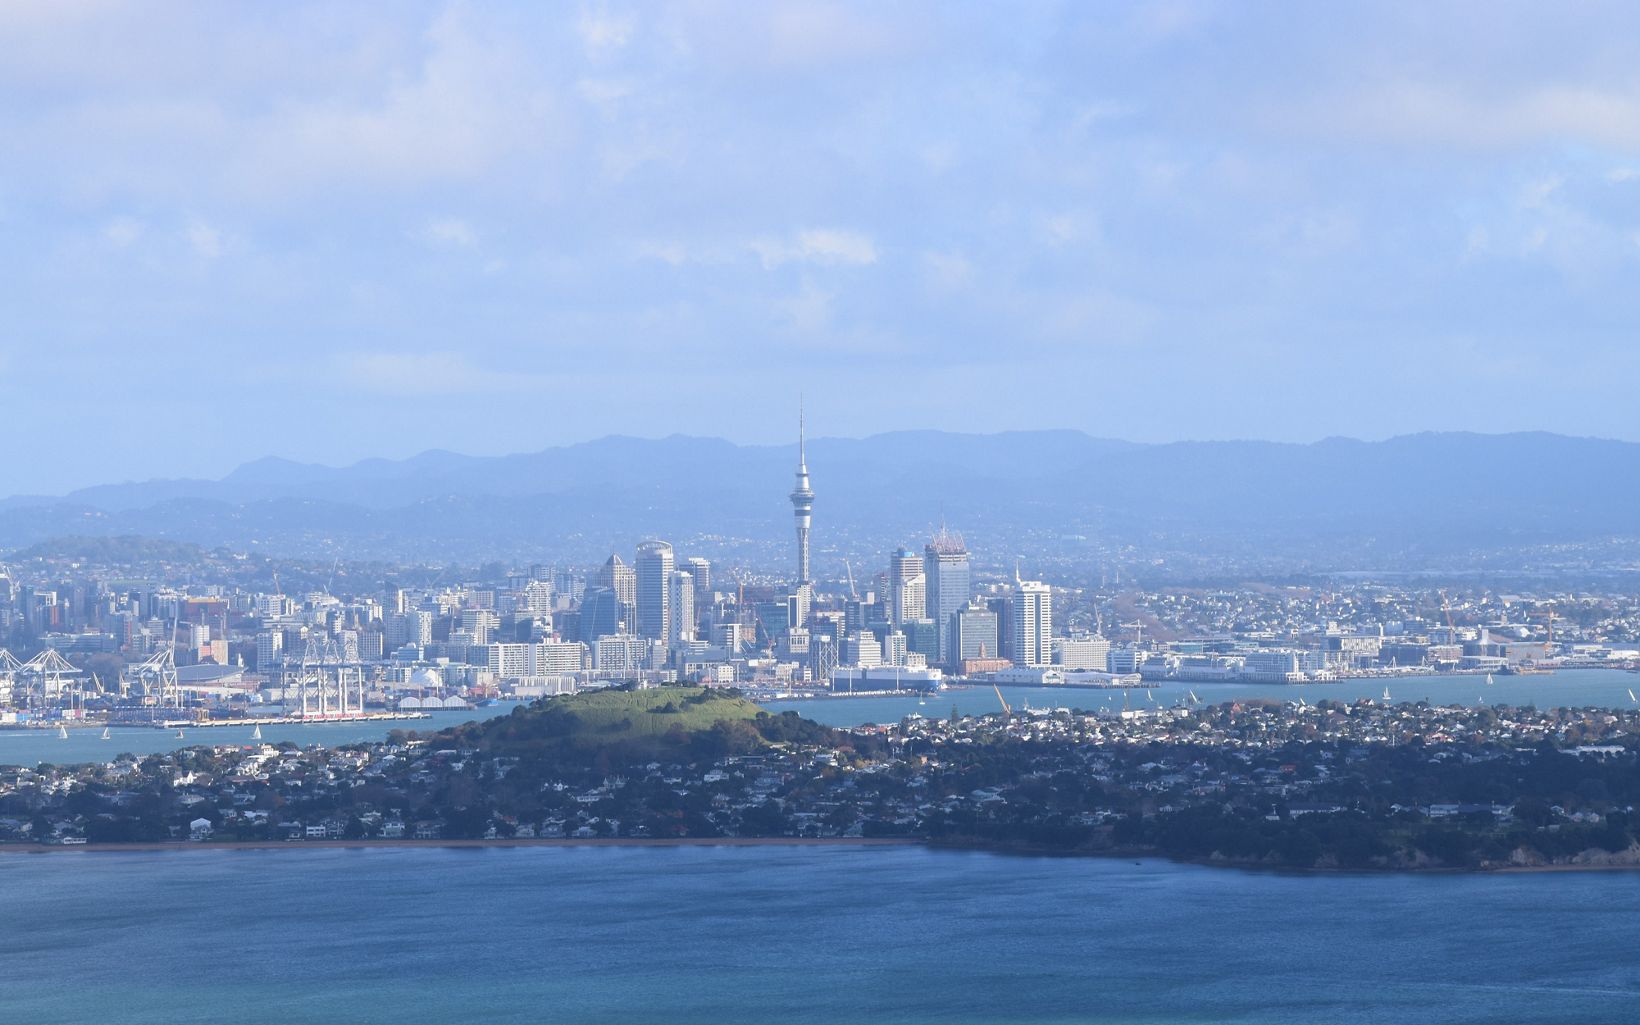 Integrated Management Based in Auckland, the Hauraki Gulf Forum is a statutory body which promotes and facilitates integrated management and the protection and enhancement of the gulf. © Ethan Kearns/The Nature Conservancy